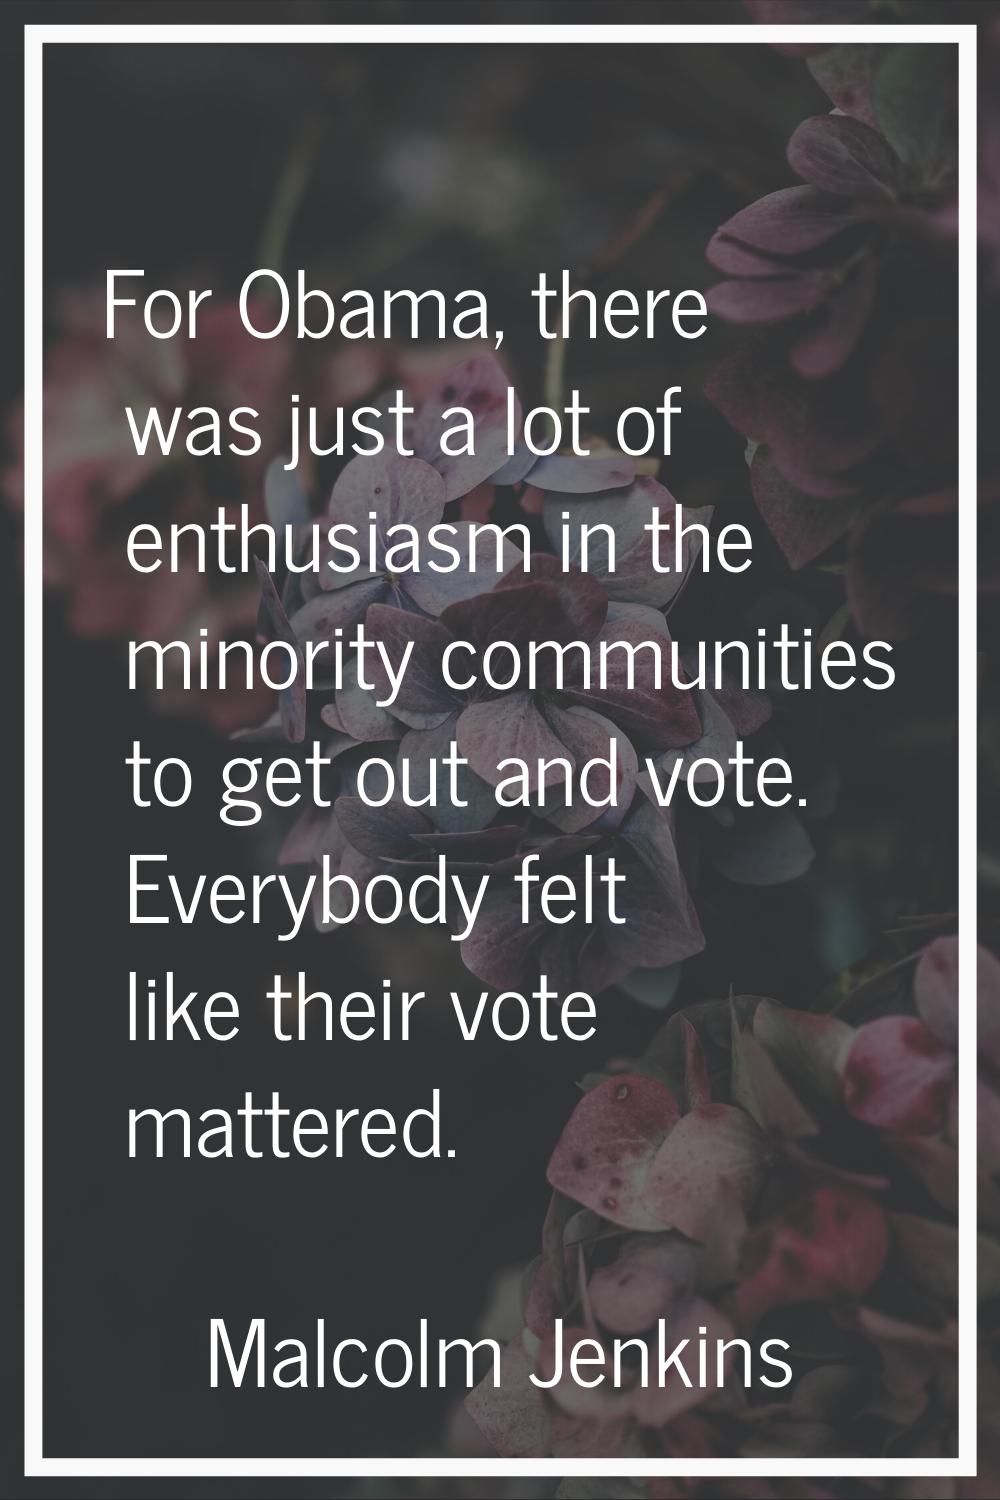 For Obama, there was just a lot of enthusiasm in the minority communities to get out and vote. Ever